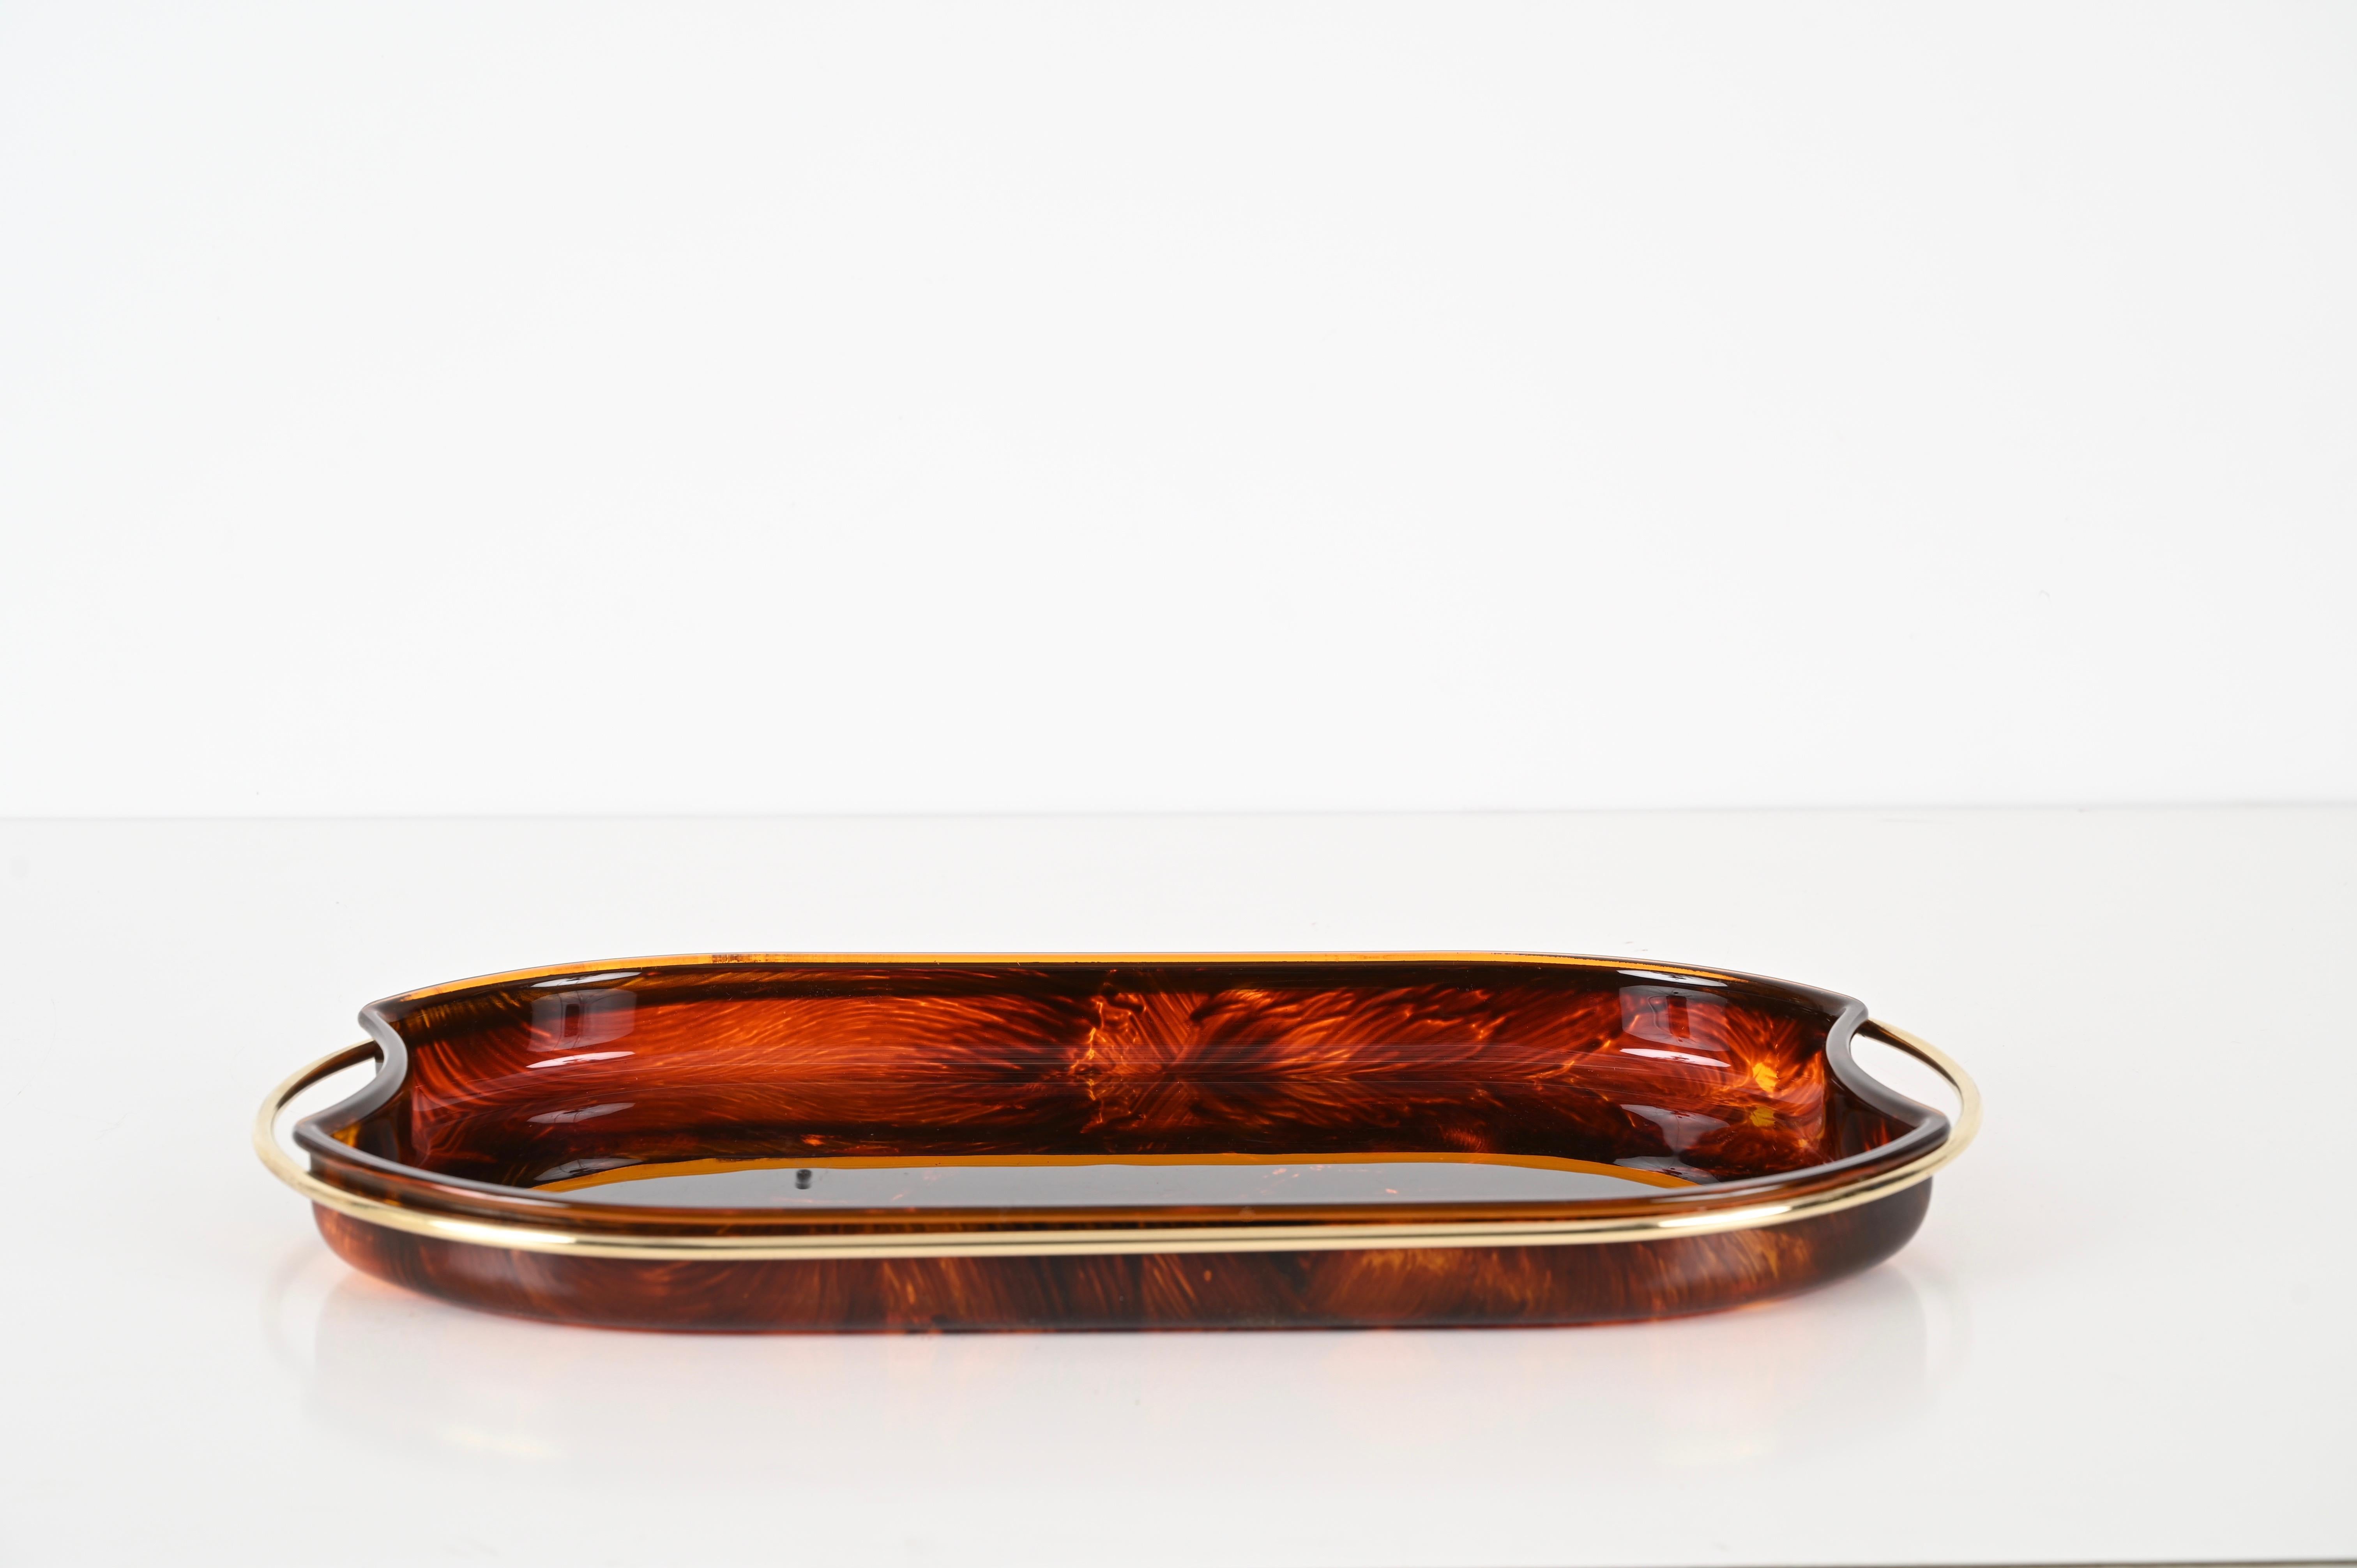 Acrylic Midcentury Modern By Guzzini Italian Lucite and Brass Oval Serving Tray, 1970s For Sale